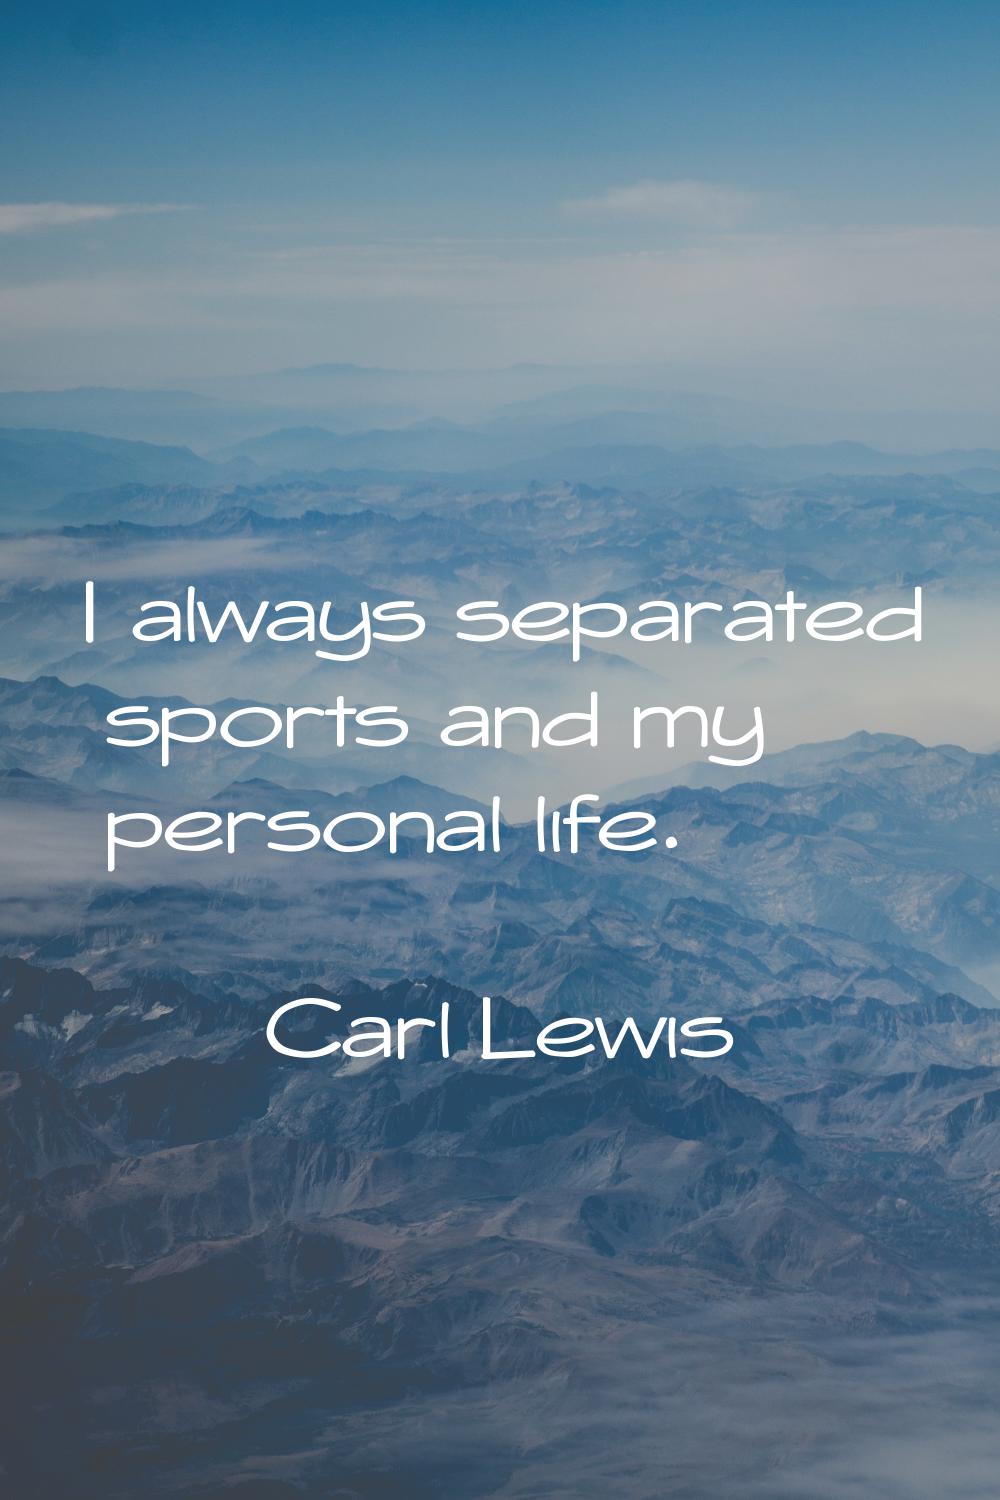 I always separated sports and my personal life.